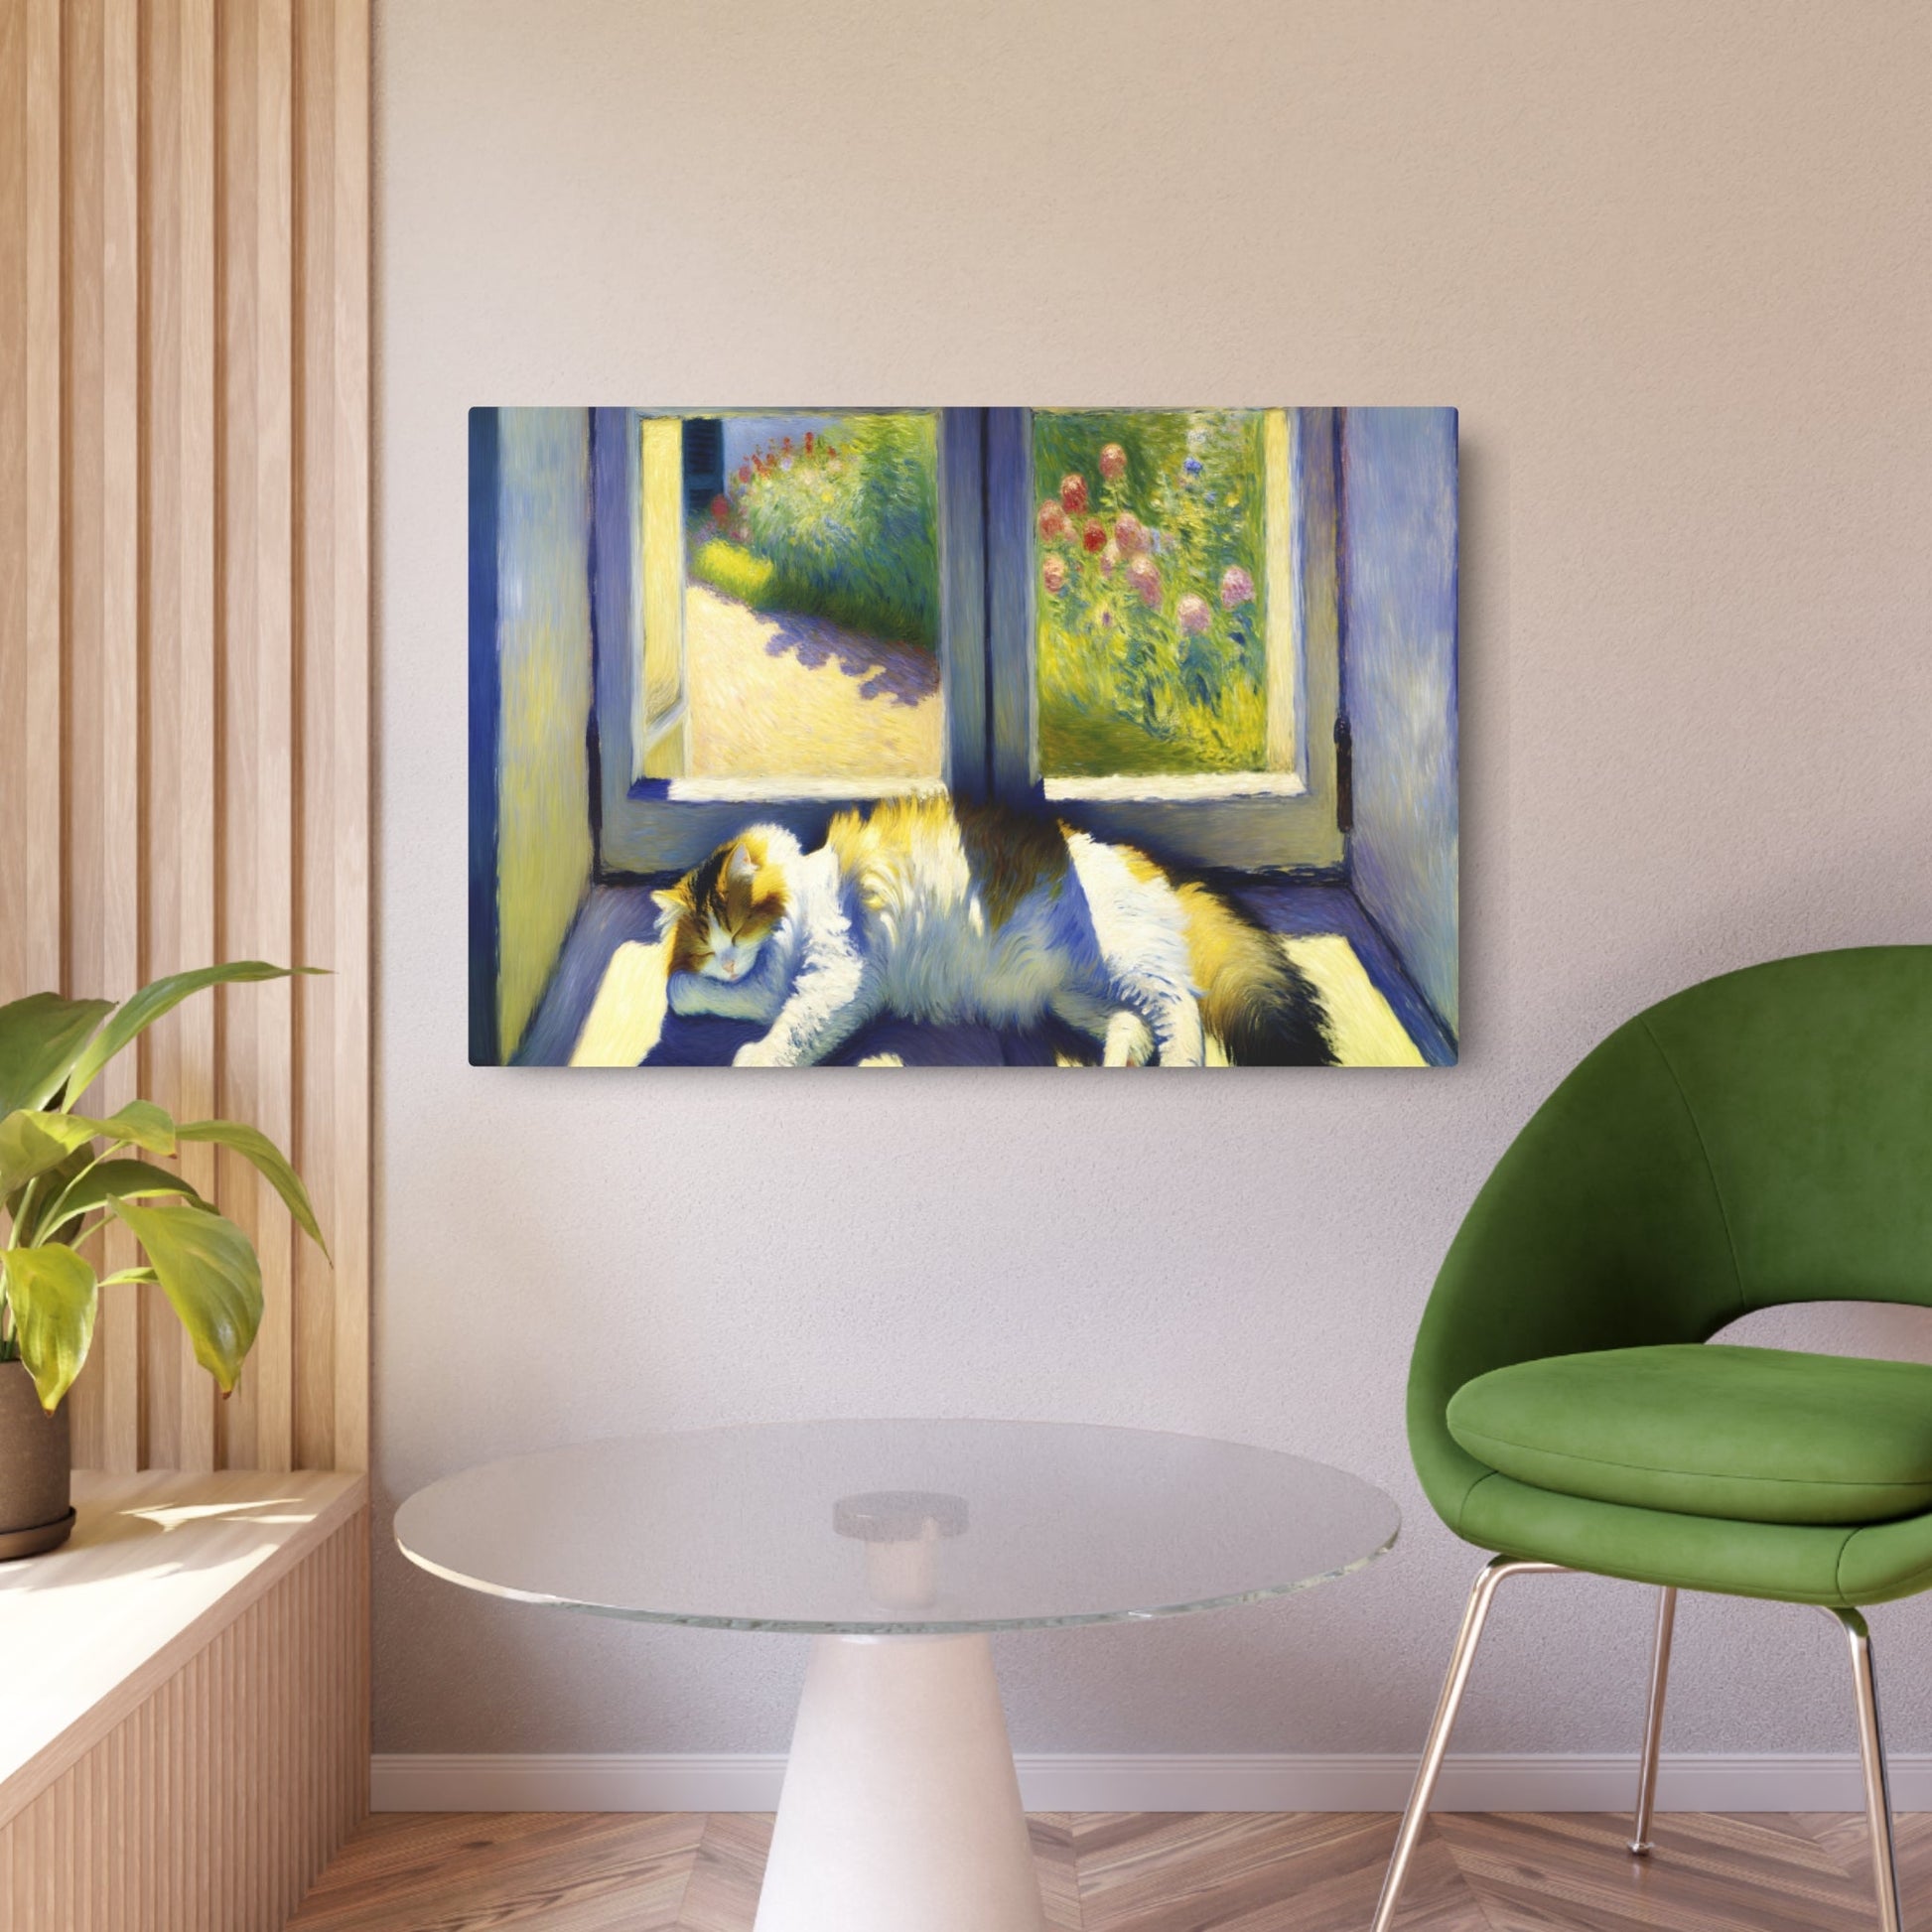 Metal Poster Art | "Impressionist Western Art: Sun-Drenched Cat Lounging on Windowsill Painting" - Metal Poster Art 36″ x 24″ (Horizontal) 0.12''